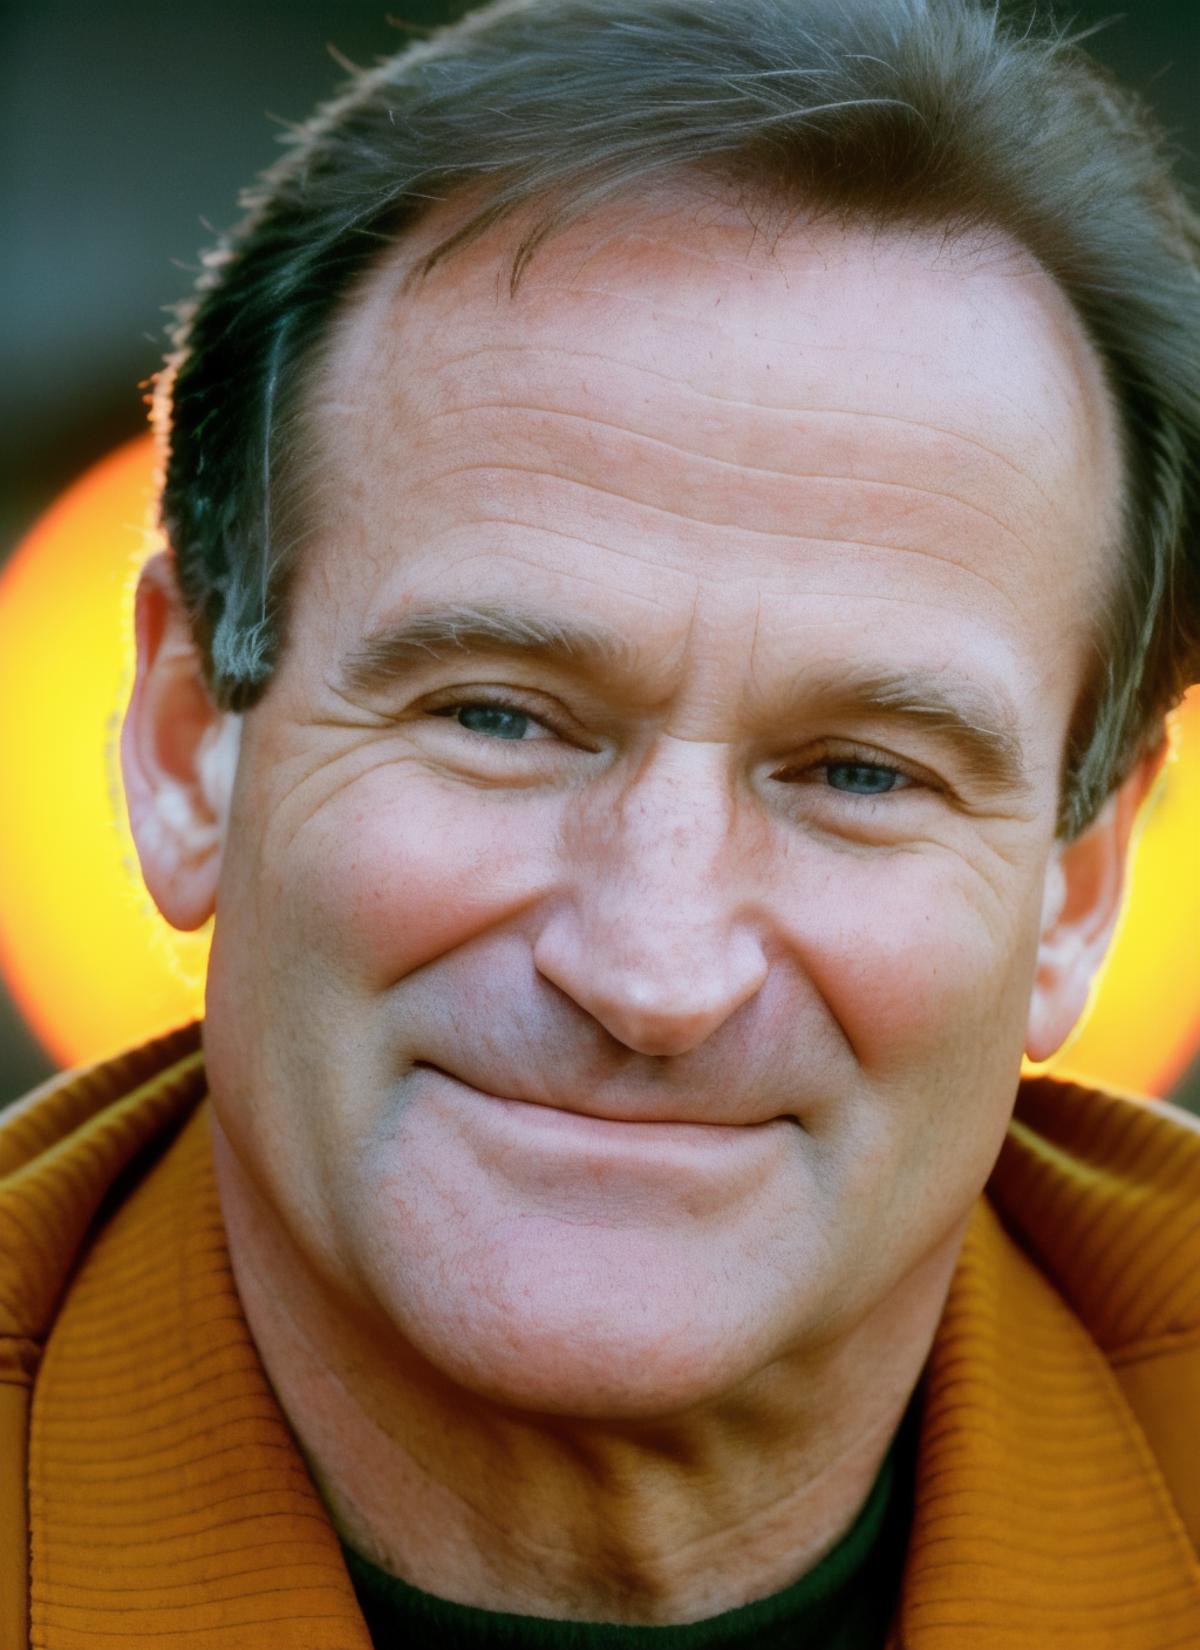 Robin Williams (in loving memory) image by astragartist